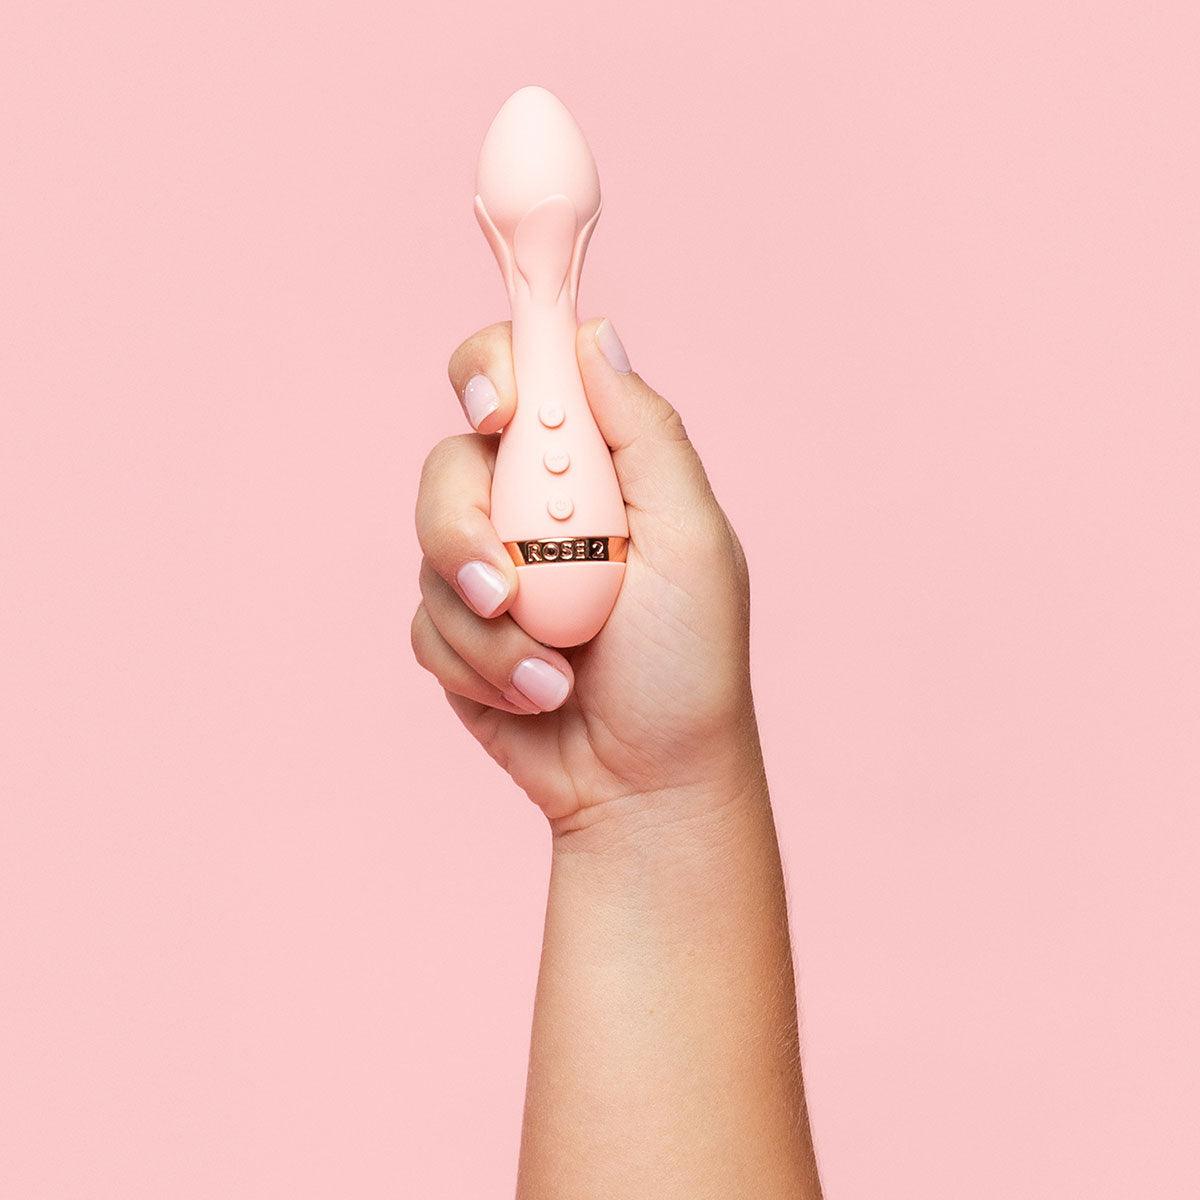 VUSH Rose 2 Precision Bullet Vibrator - Buy At Luxury Toy X - Free 3-Day Shipping